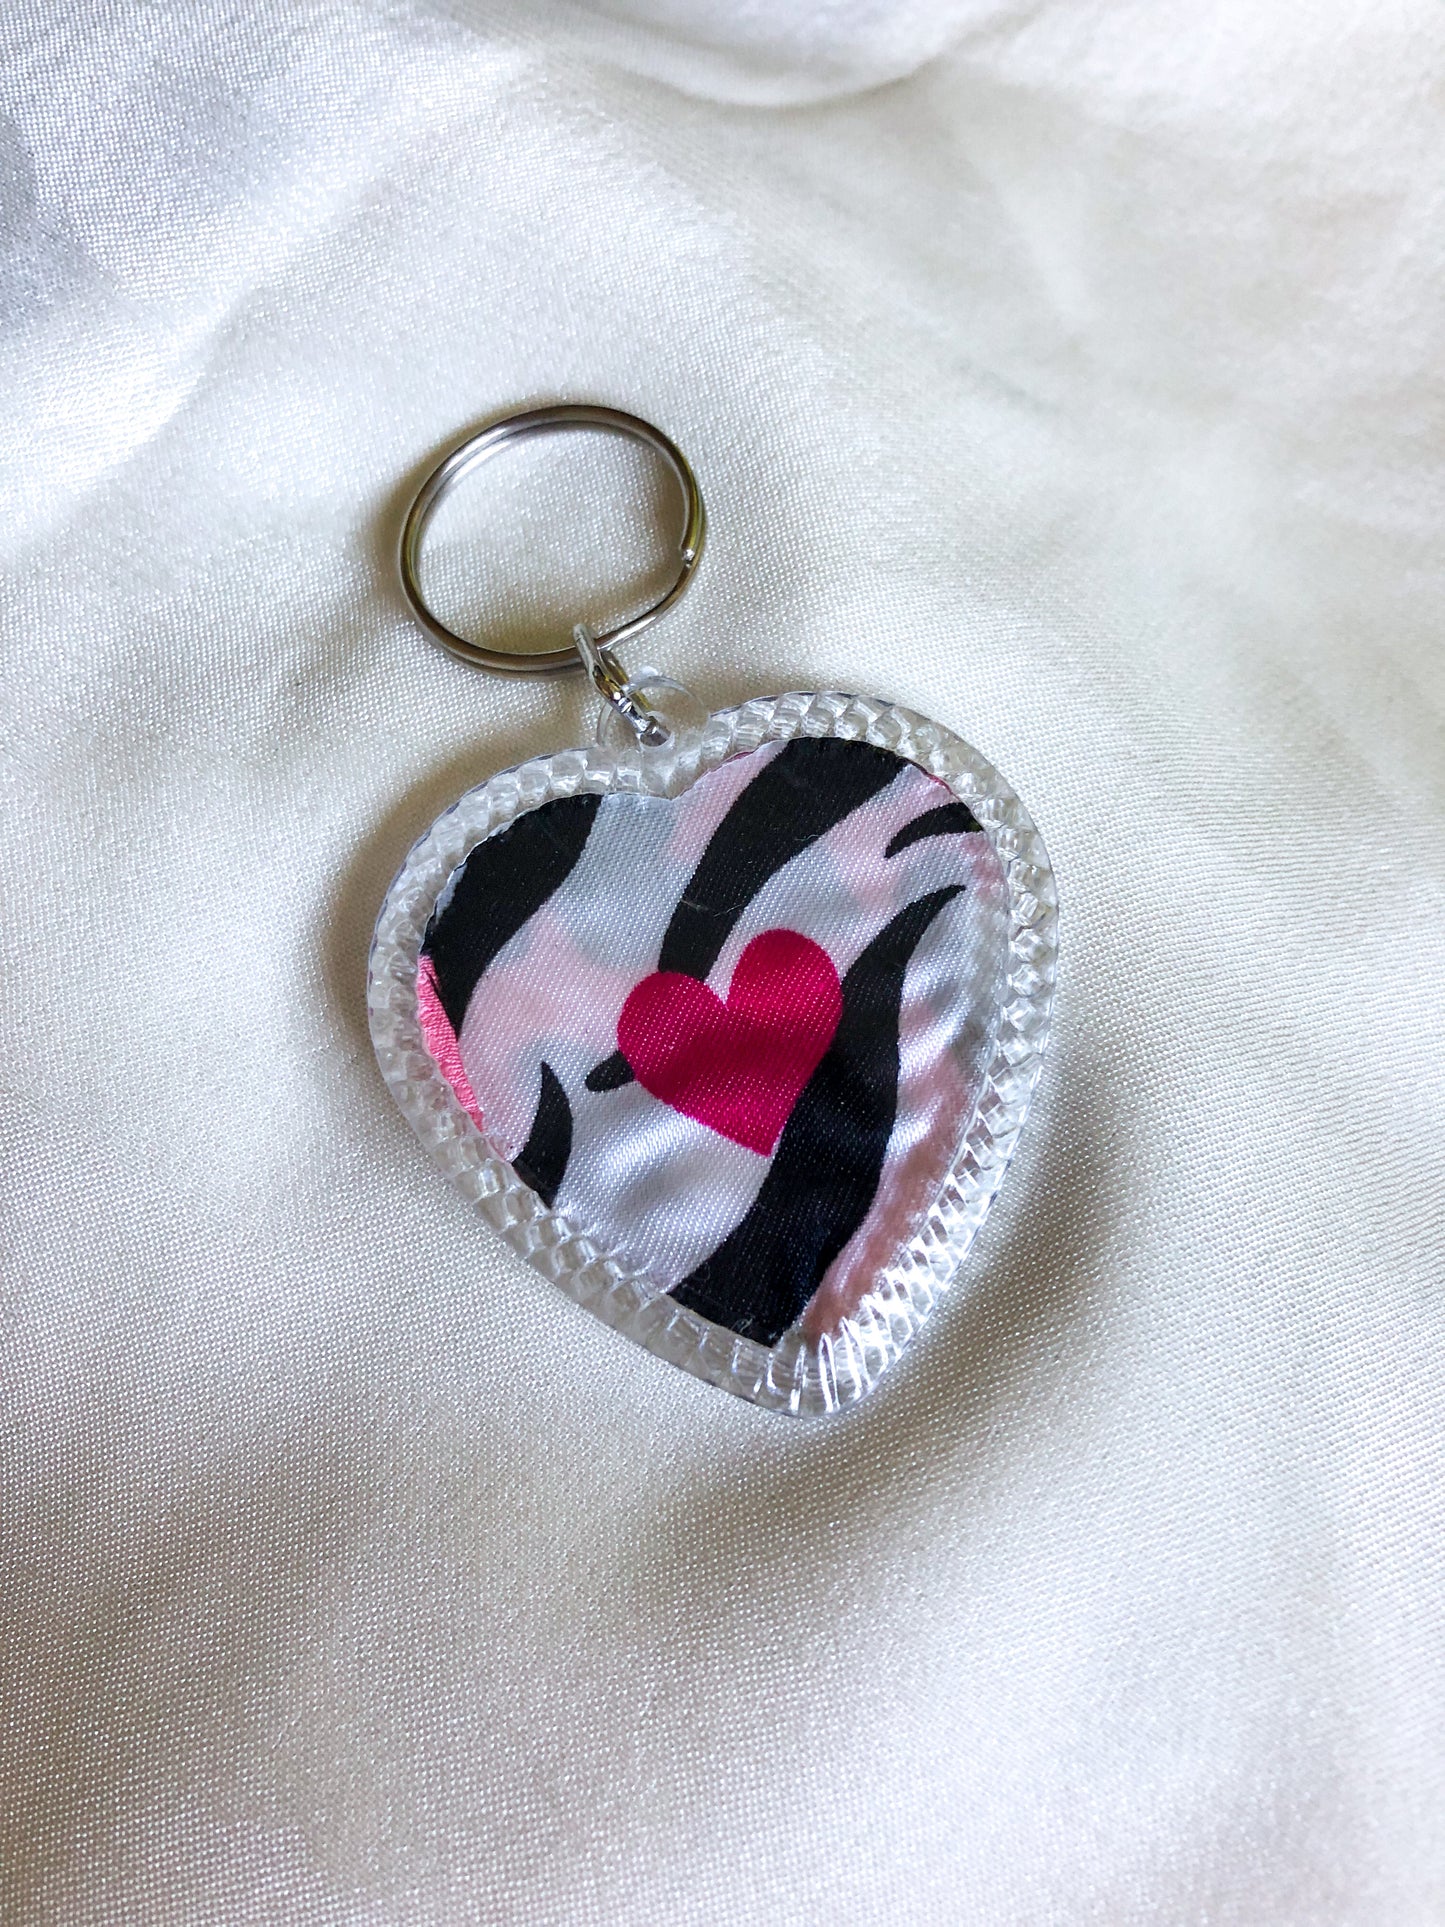 Heart Shaped Keyring - Pink Leopard and Zebra Heart - Upcycled - Duo Design